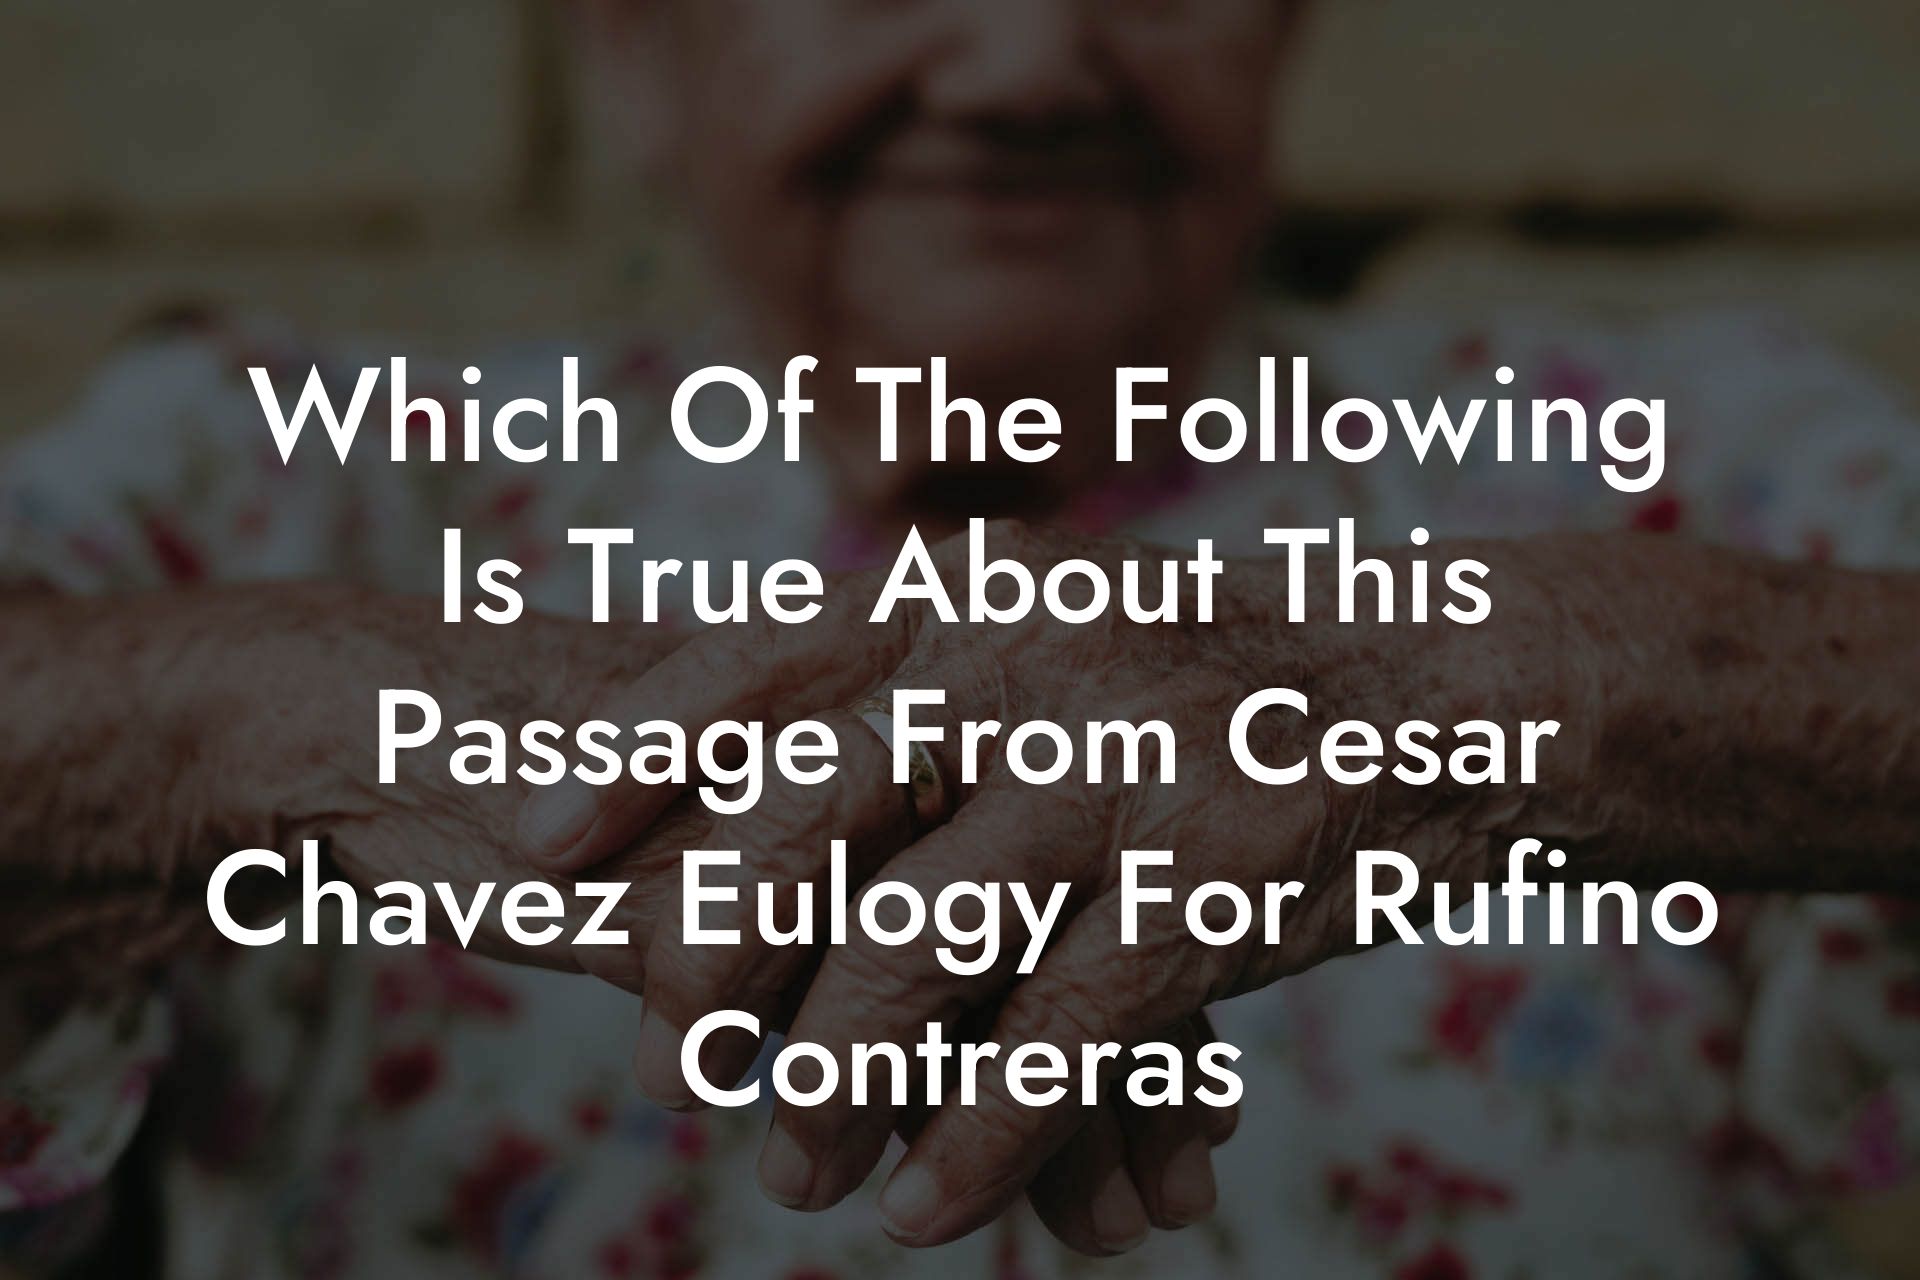 Which Of The Following Is True About This Passage From Cesar Chavez Eulogy For Rufino Contreras